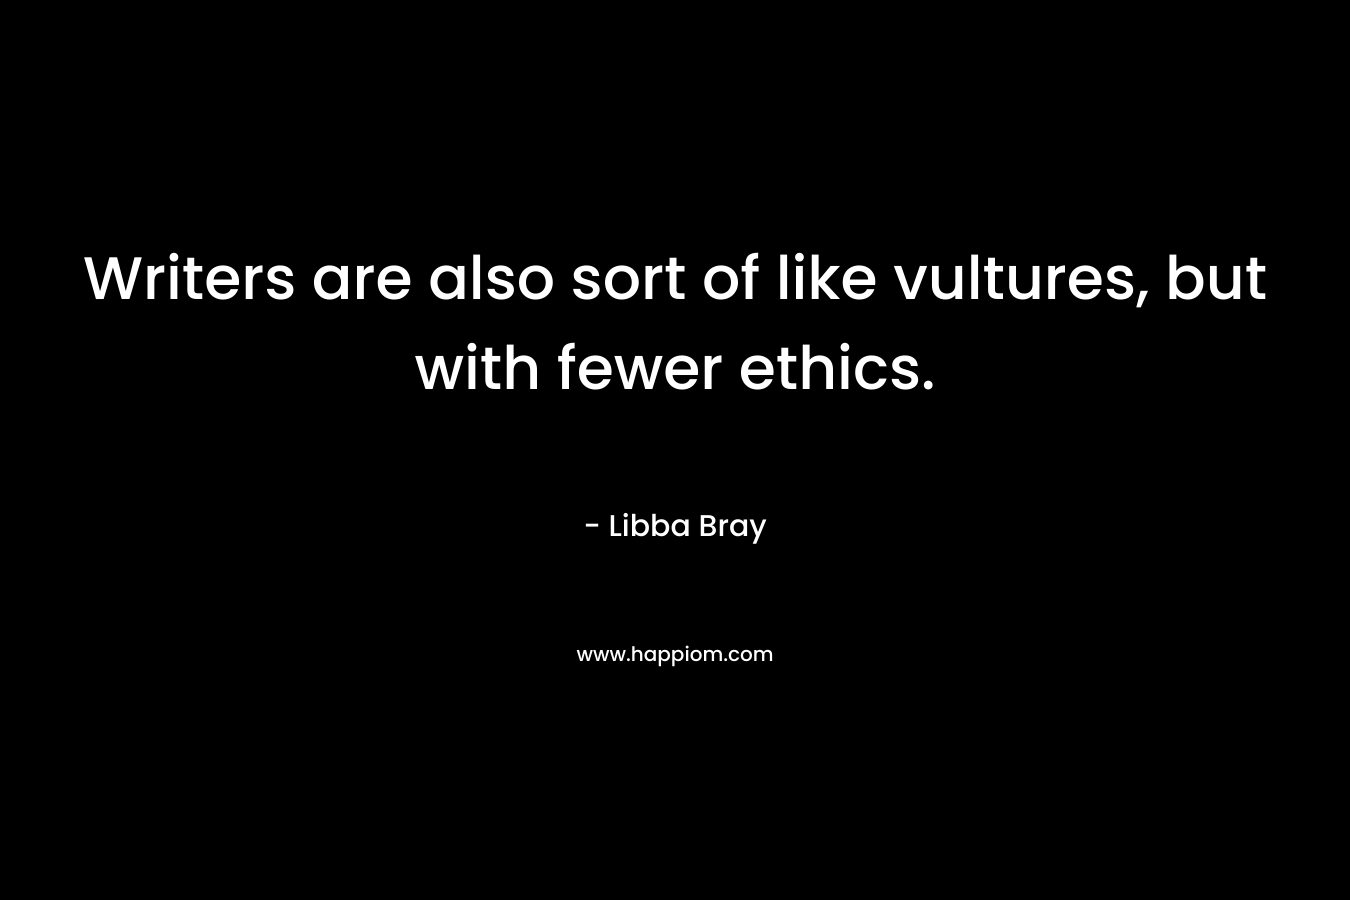 Writers are also sort of like vultures, but with fewer ethics. – Libba Bray